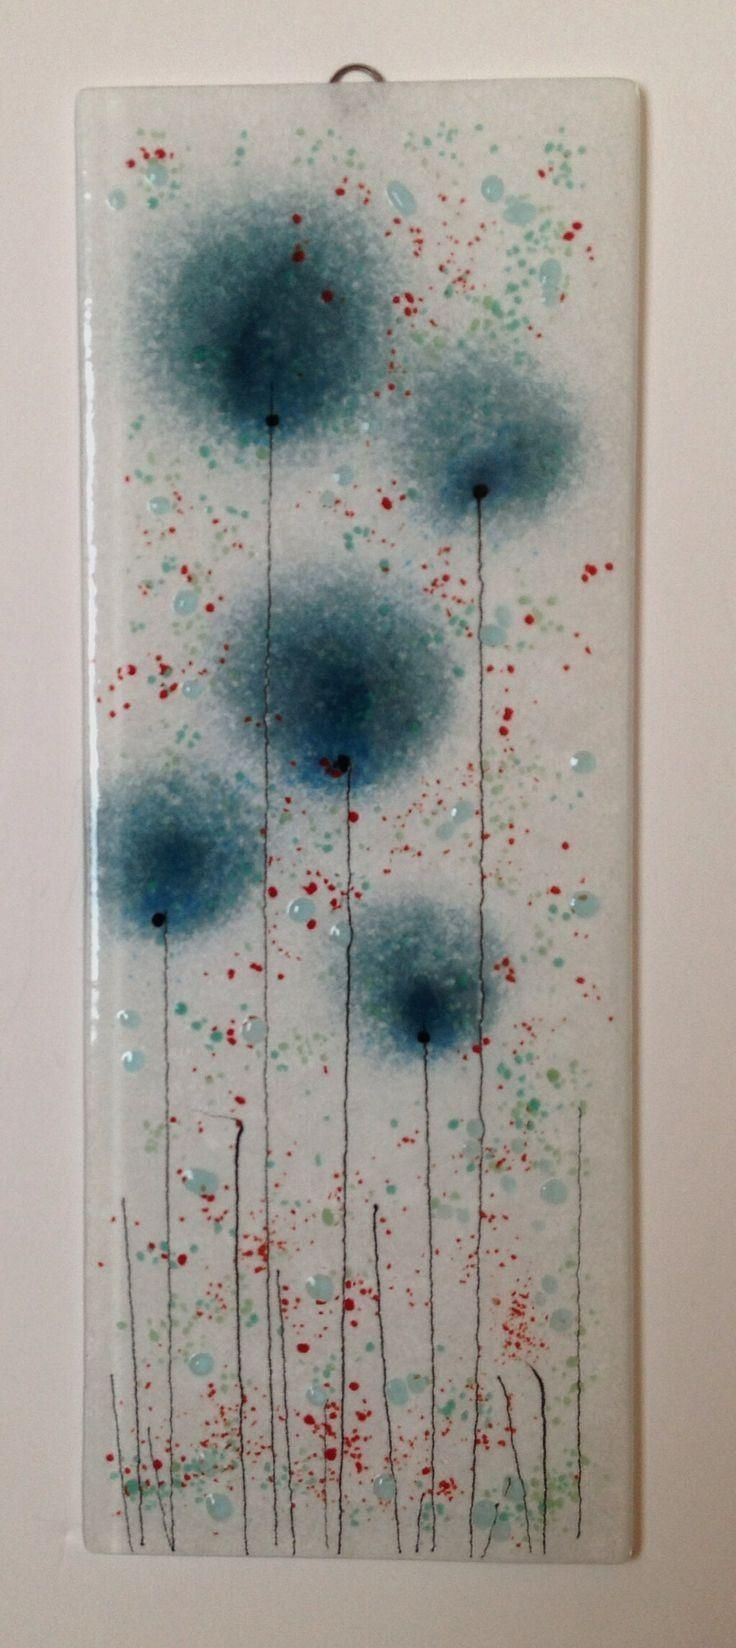 1315 Best Fused Glass Images On Pinterest | Fused Glass, Stained For Abstract Fused Glass Wall Art (View 11 of 20)